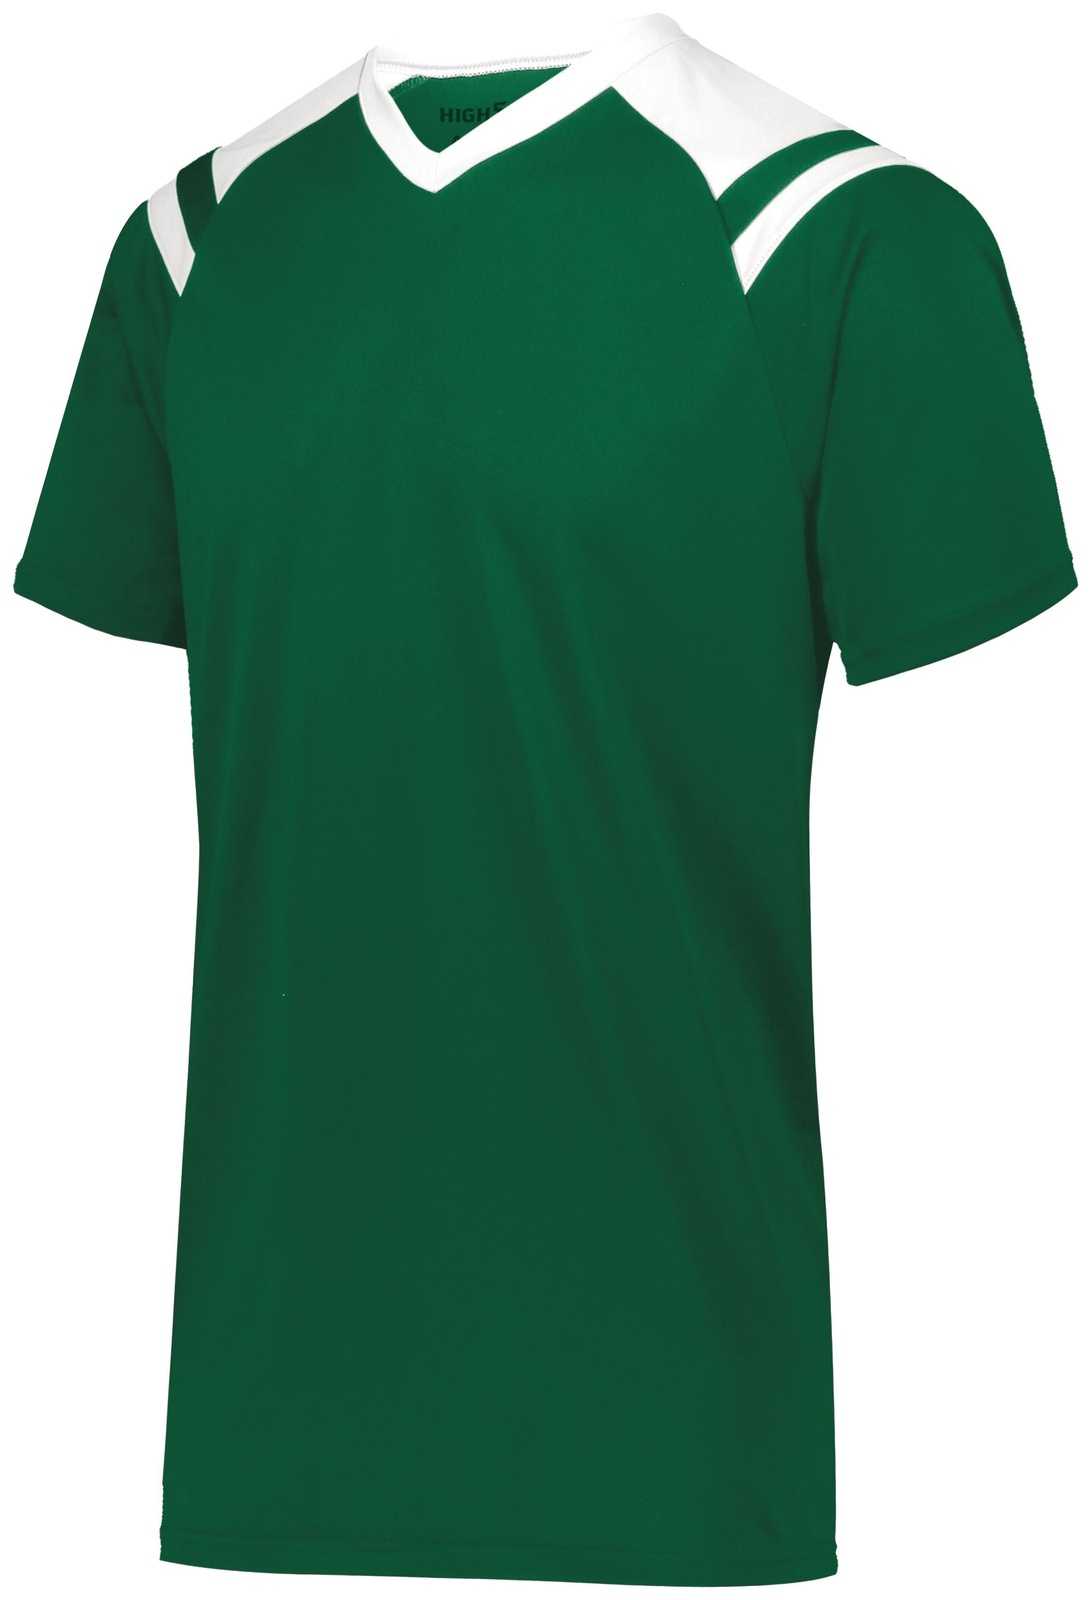 High Five 322971 Youth Sheffield Jersey - Dark Green White - HIT a Double